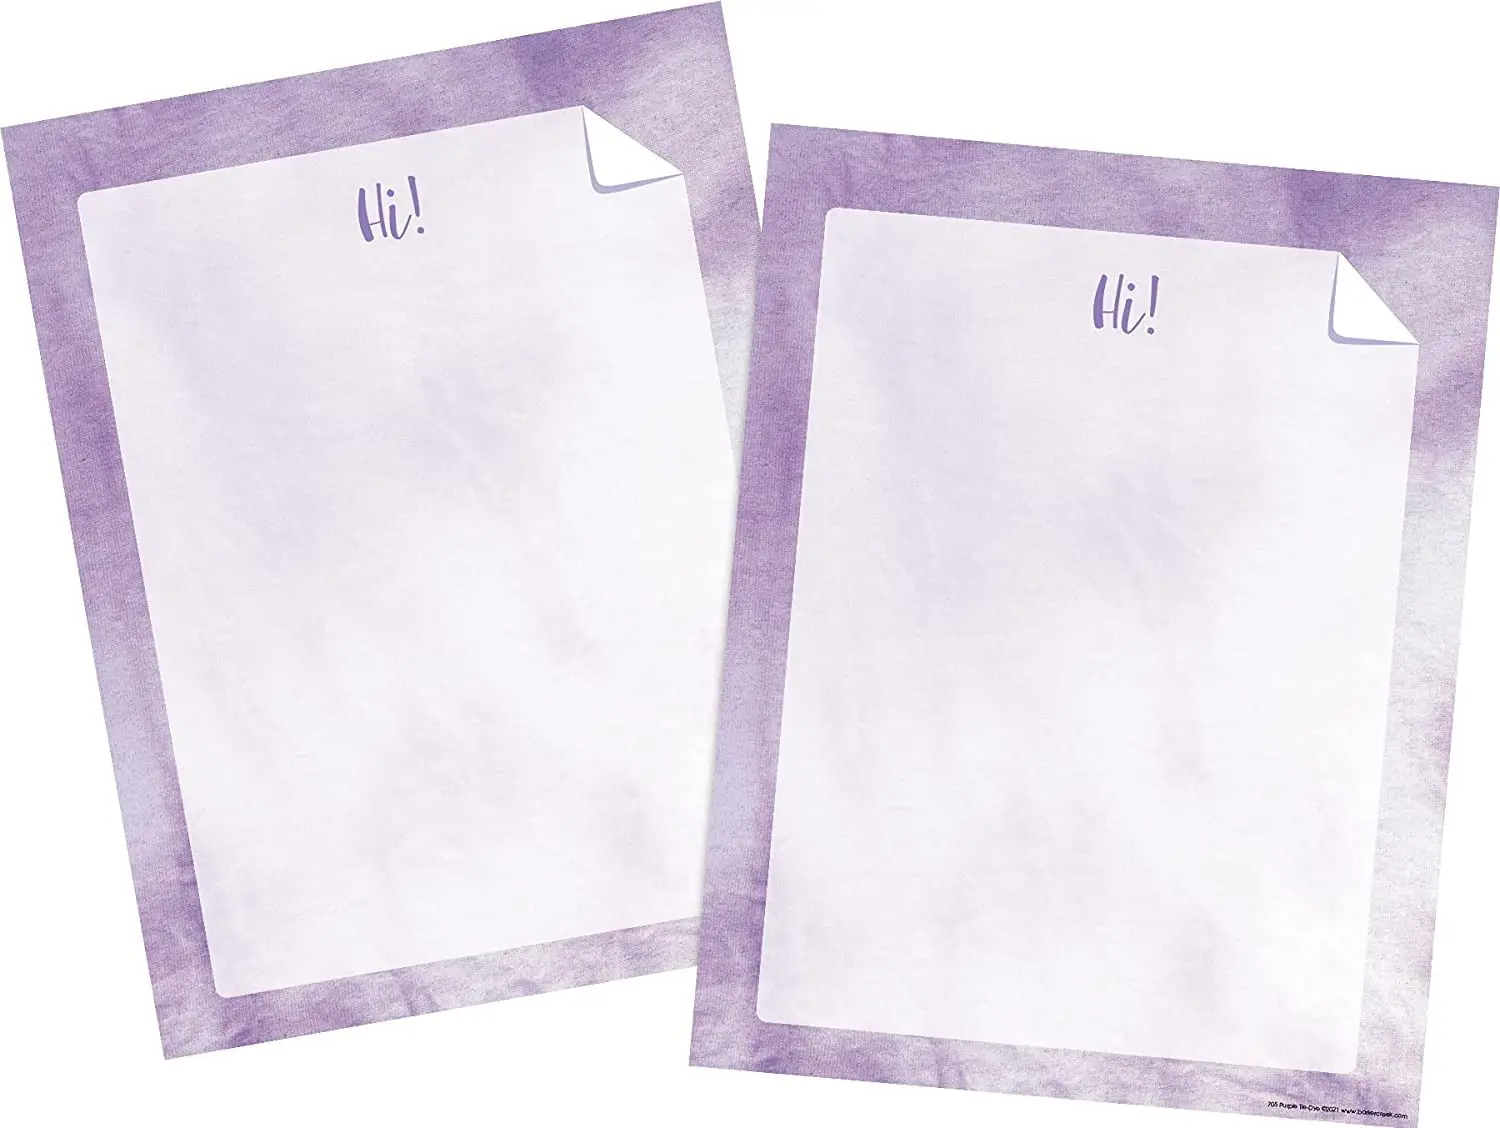 

Computer Paper 100 Sheet Set, Purple Tie-Dye, Decorative Paper, Stationery, 8.5" x 11", 100 sheets, Home, School, and Office Sup